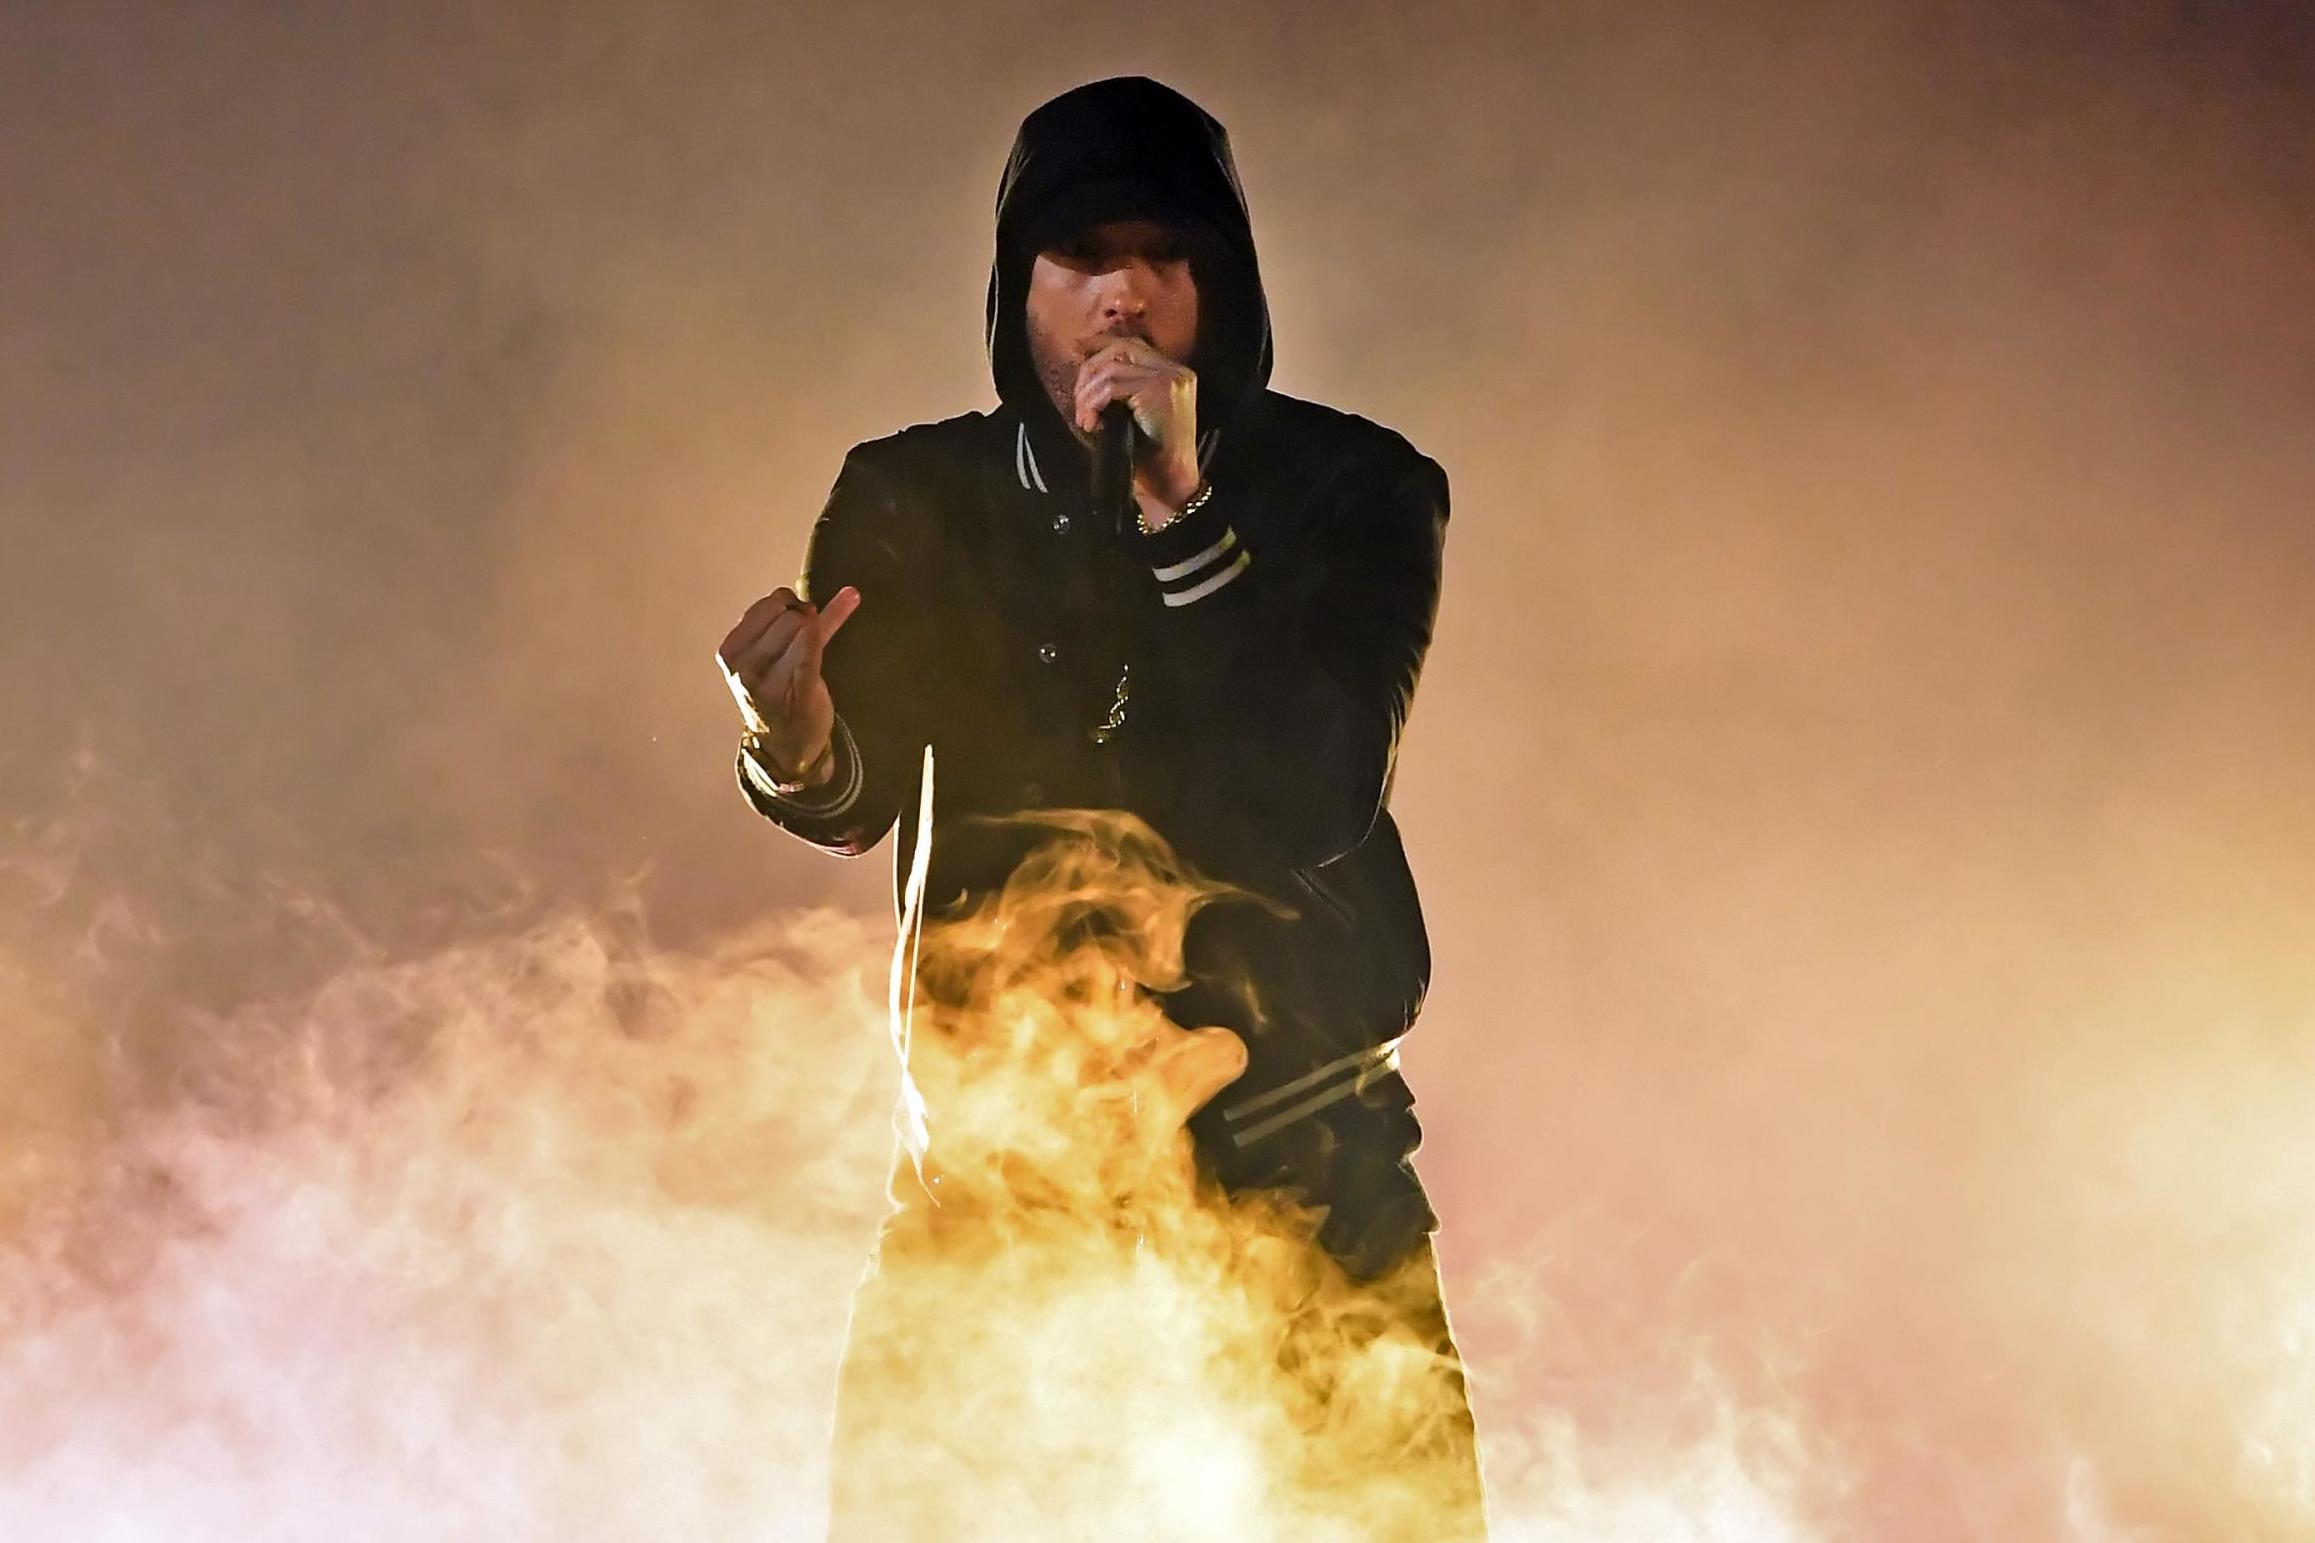 Eminem performs on 11 March 2018 in Inglewood, California.